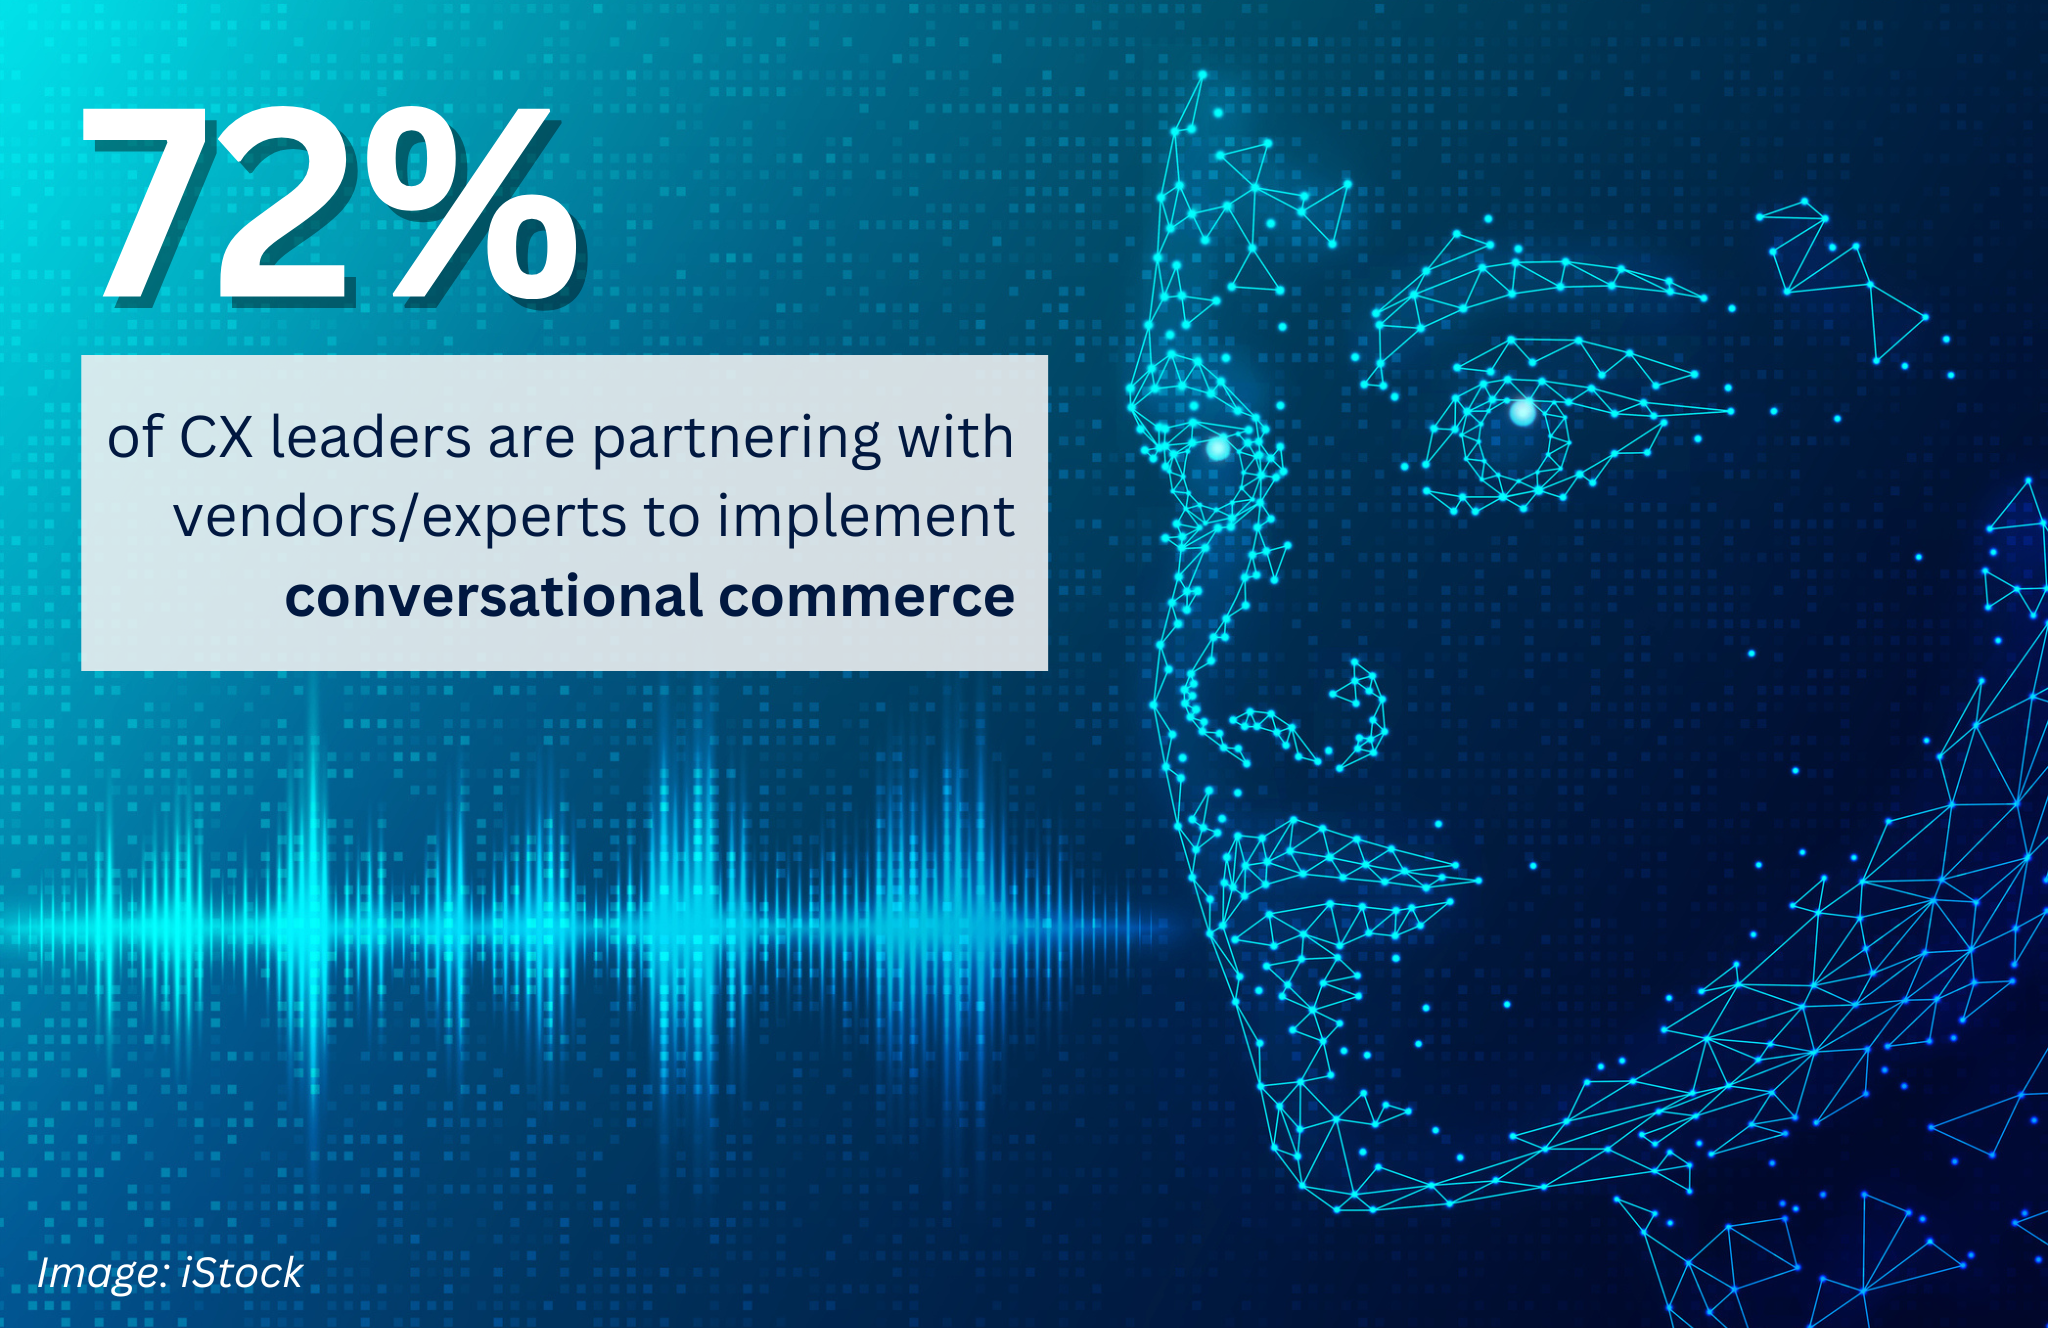 <h3>72% of CX leaders are partnering to implement conversational commerce, the ability to purchase products within chat interactions. </h3>